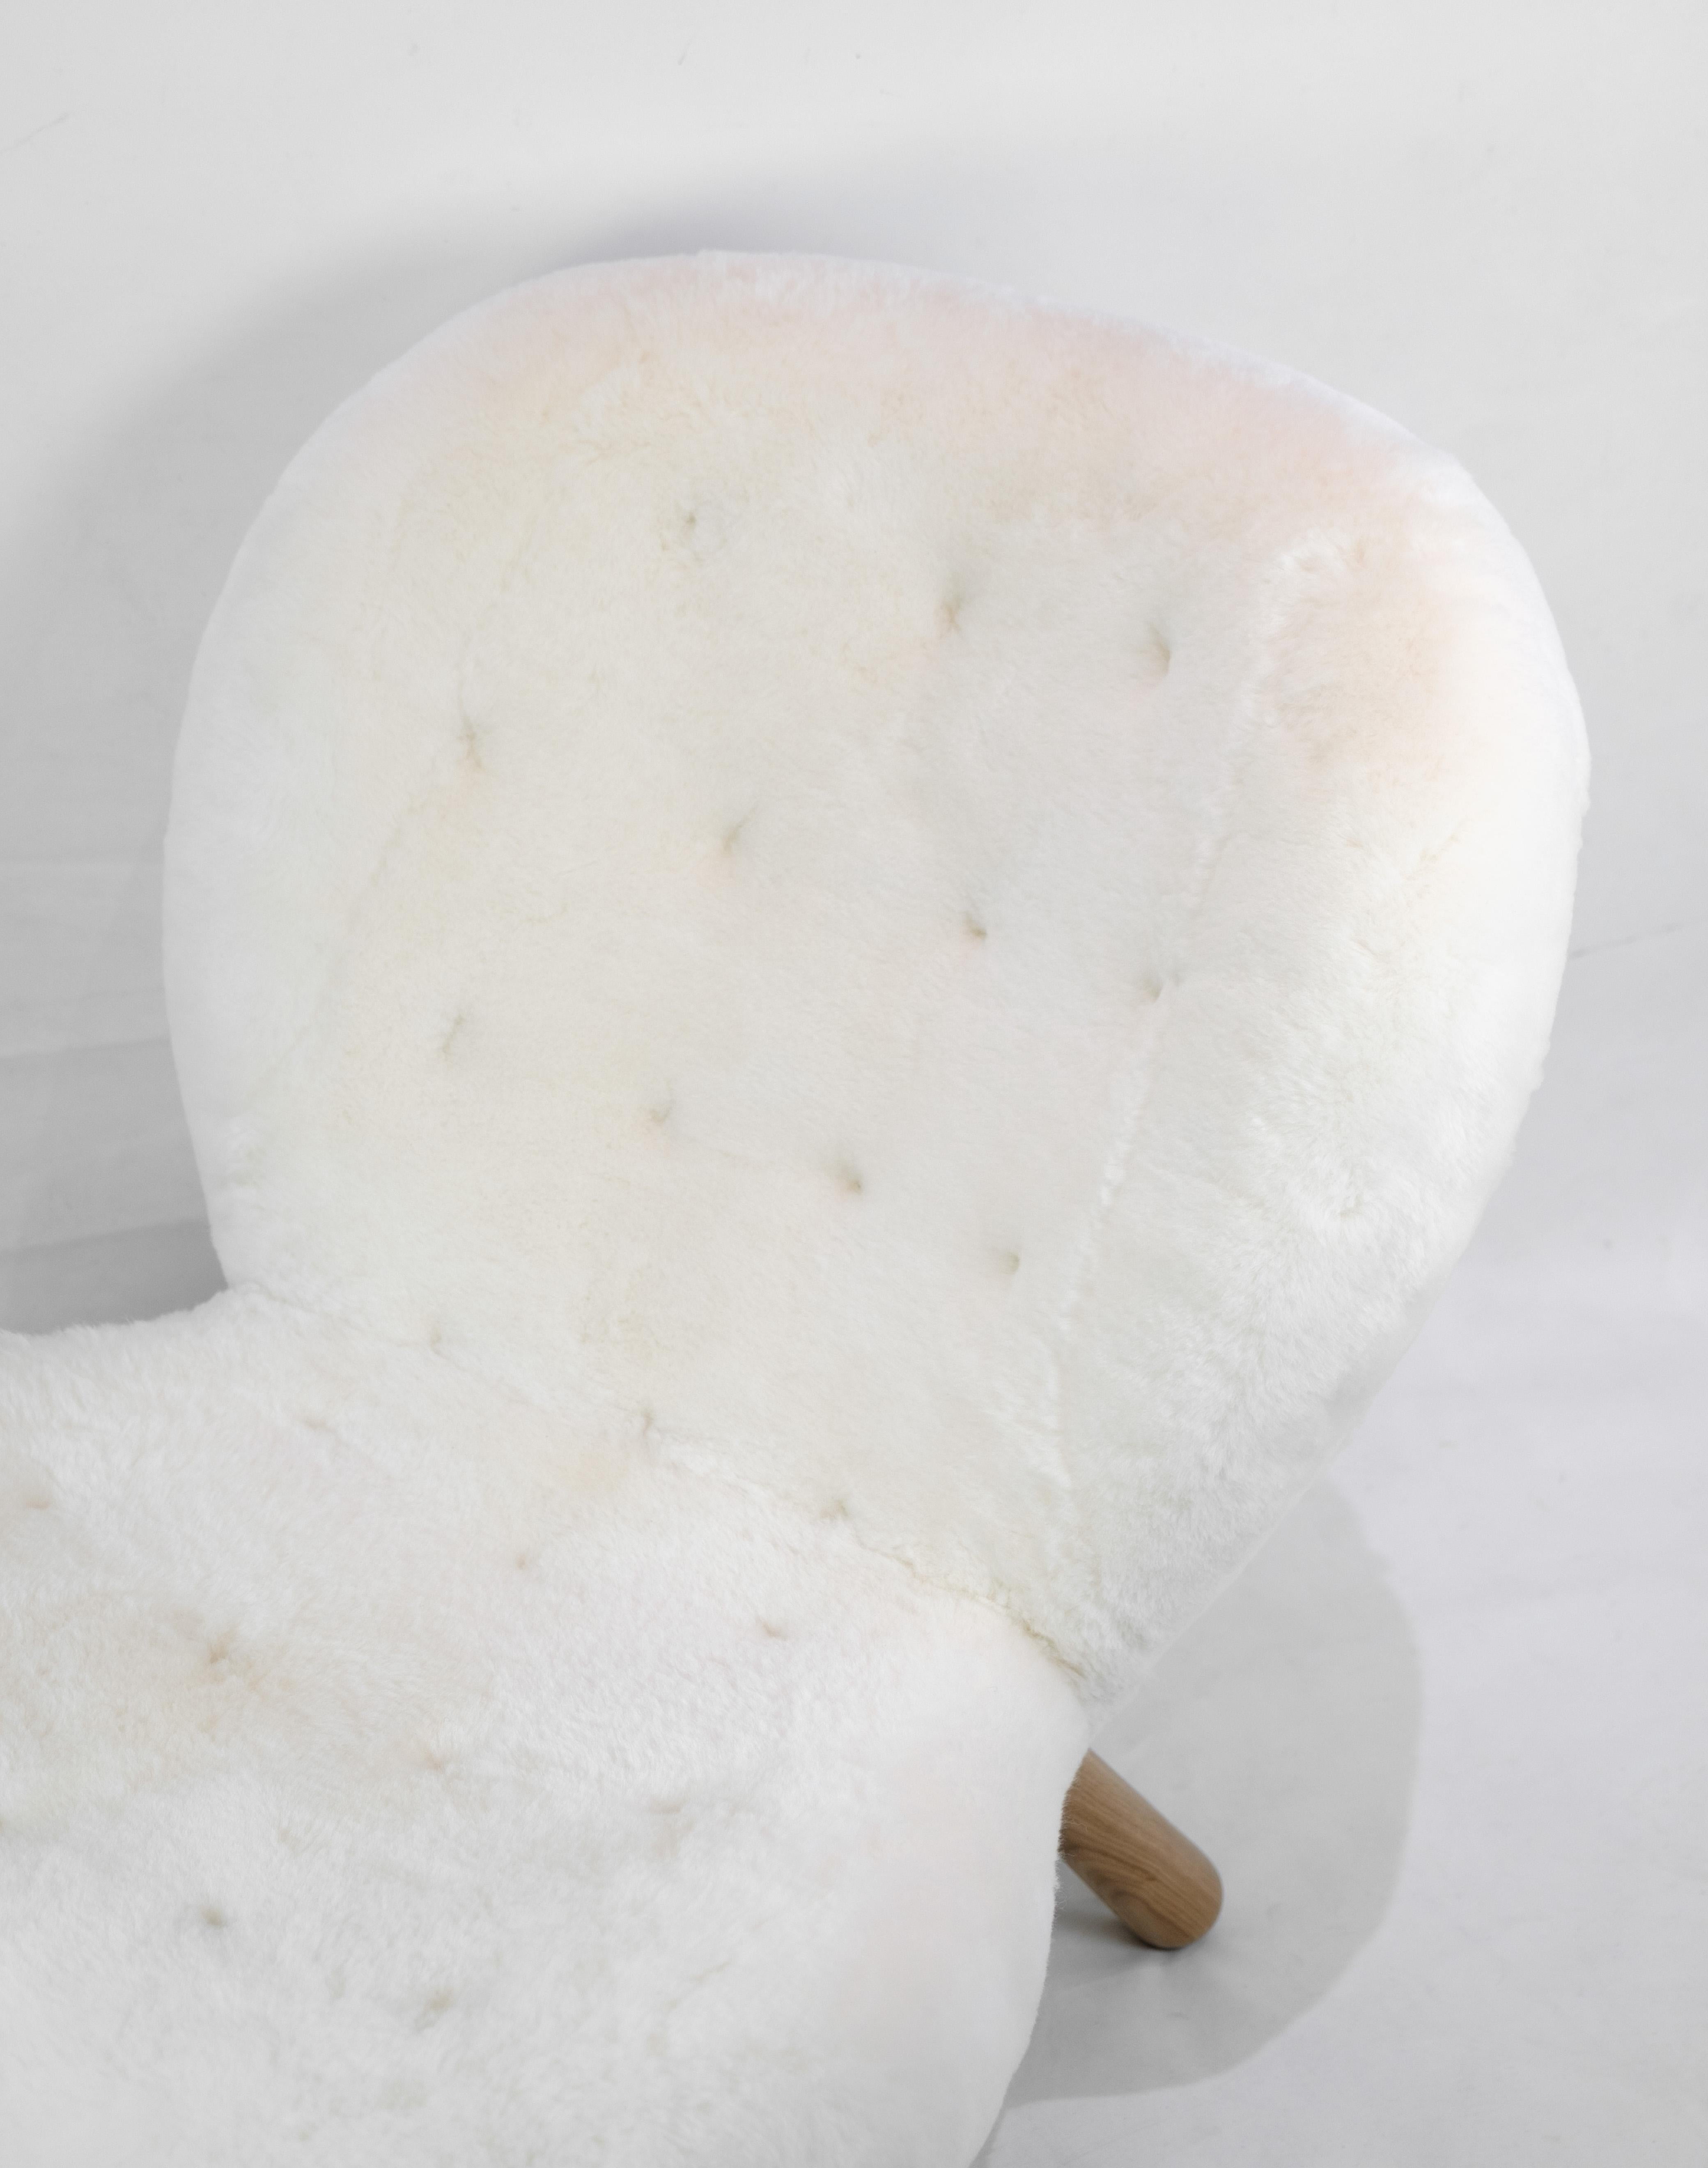 The Arctander chair, affectionately known as the (the Clam Chair), designed by Philip Arctander and upholstered with luxurious sheepskin. This lounge chair is renowned for its high quality and incredibly comfortable seat, making it the perfect